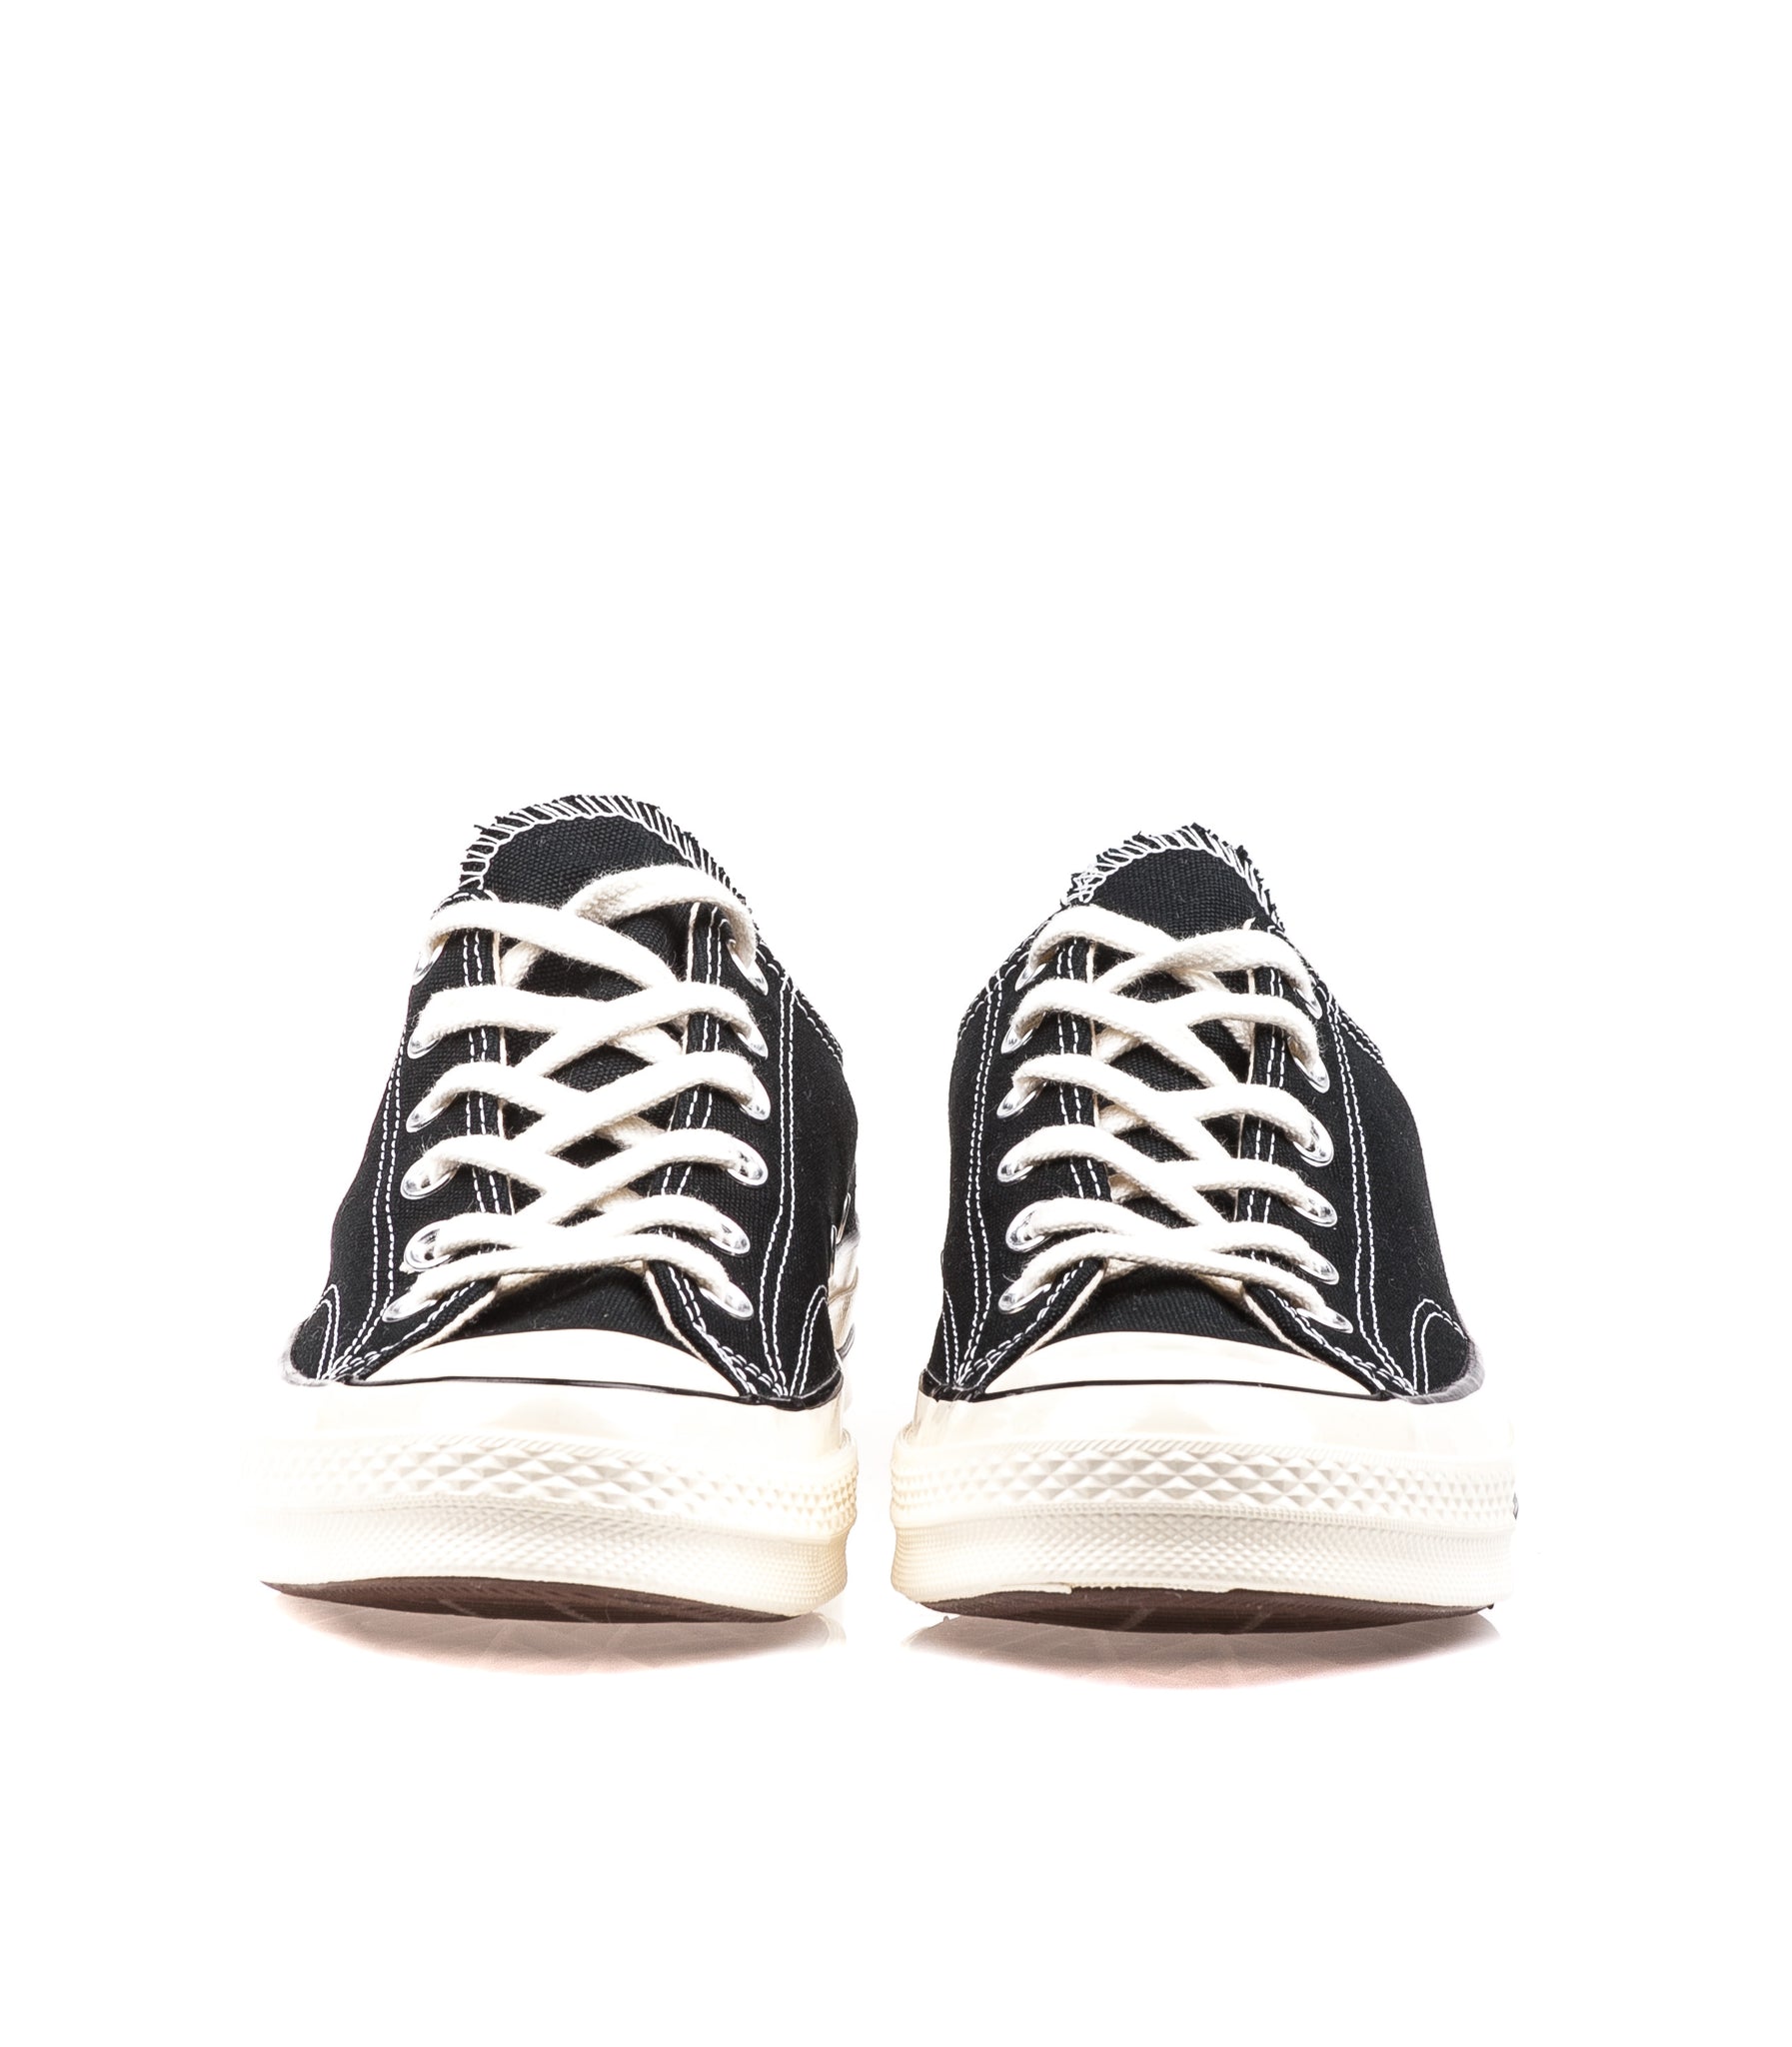 Converse Chuck Taylor All Star '70 Ox Sneakers